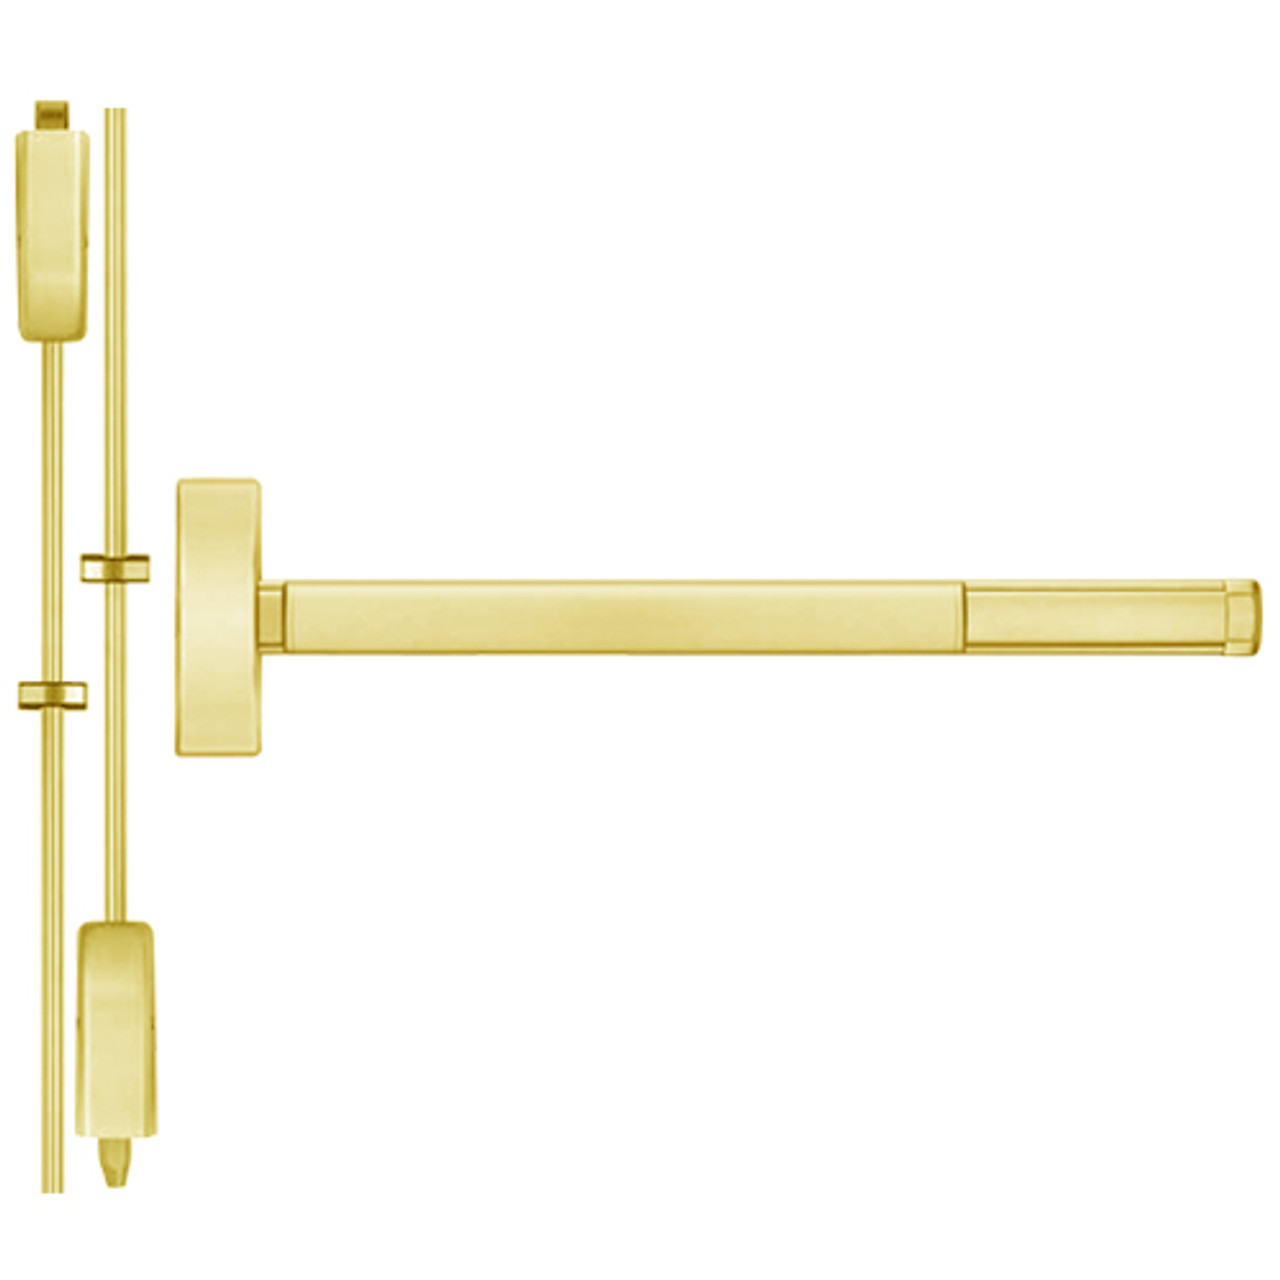 DEFL2203-605-48 PHI 2200 Series Fire Rated Apex Surface Vertical Rod Device with Delayed Egress Prepped for Key Retracts Latchbolt in Bright Brass Finish